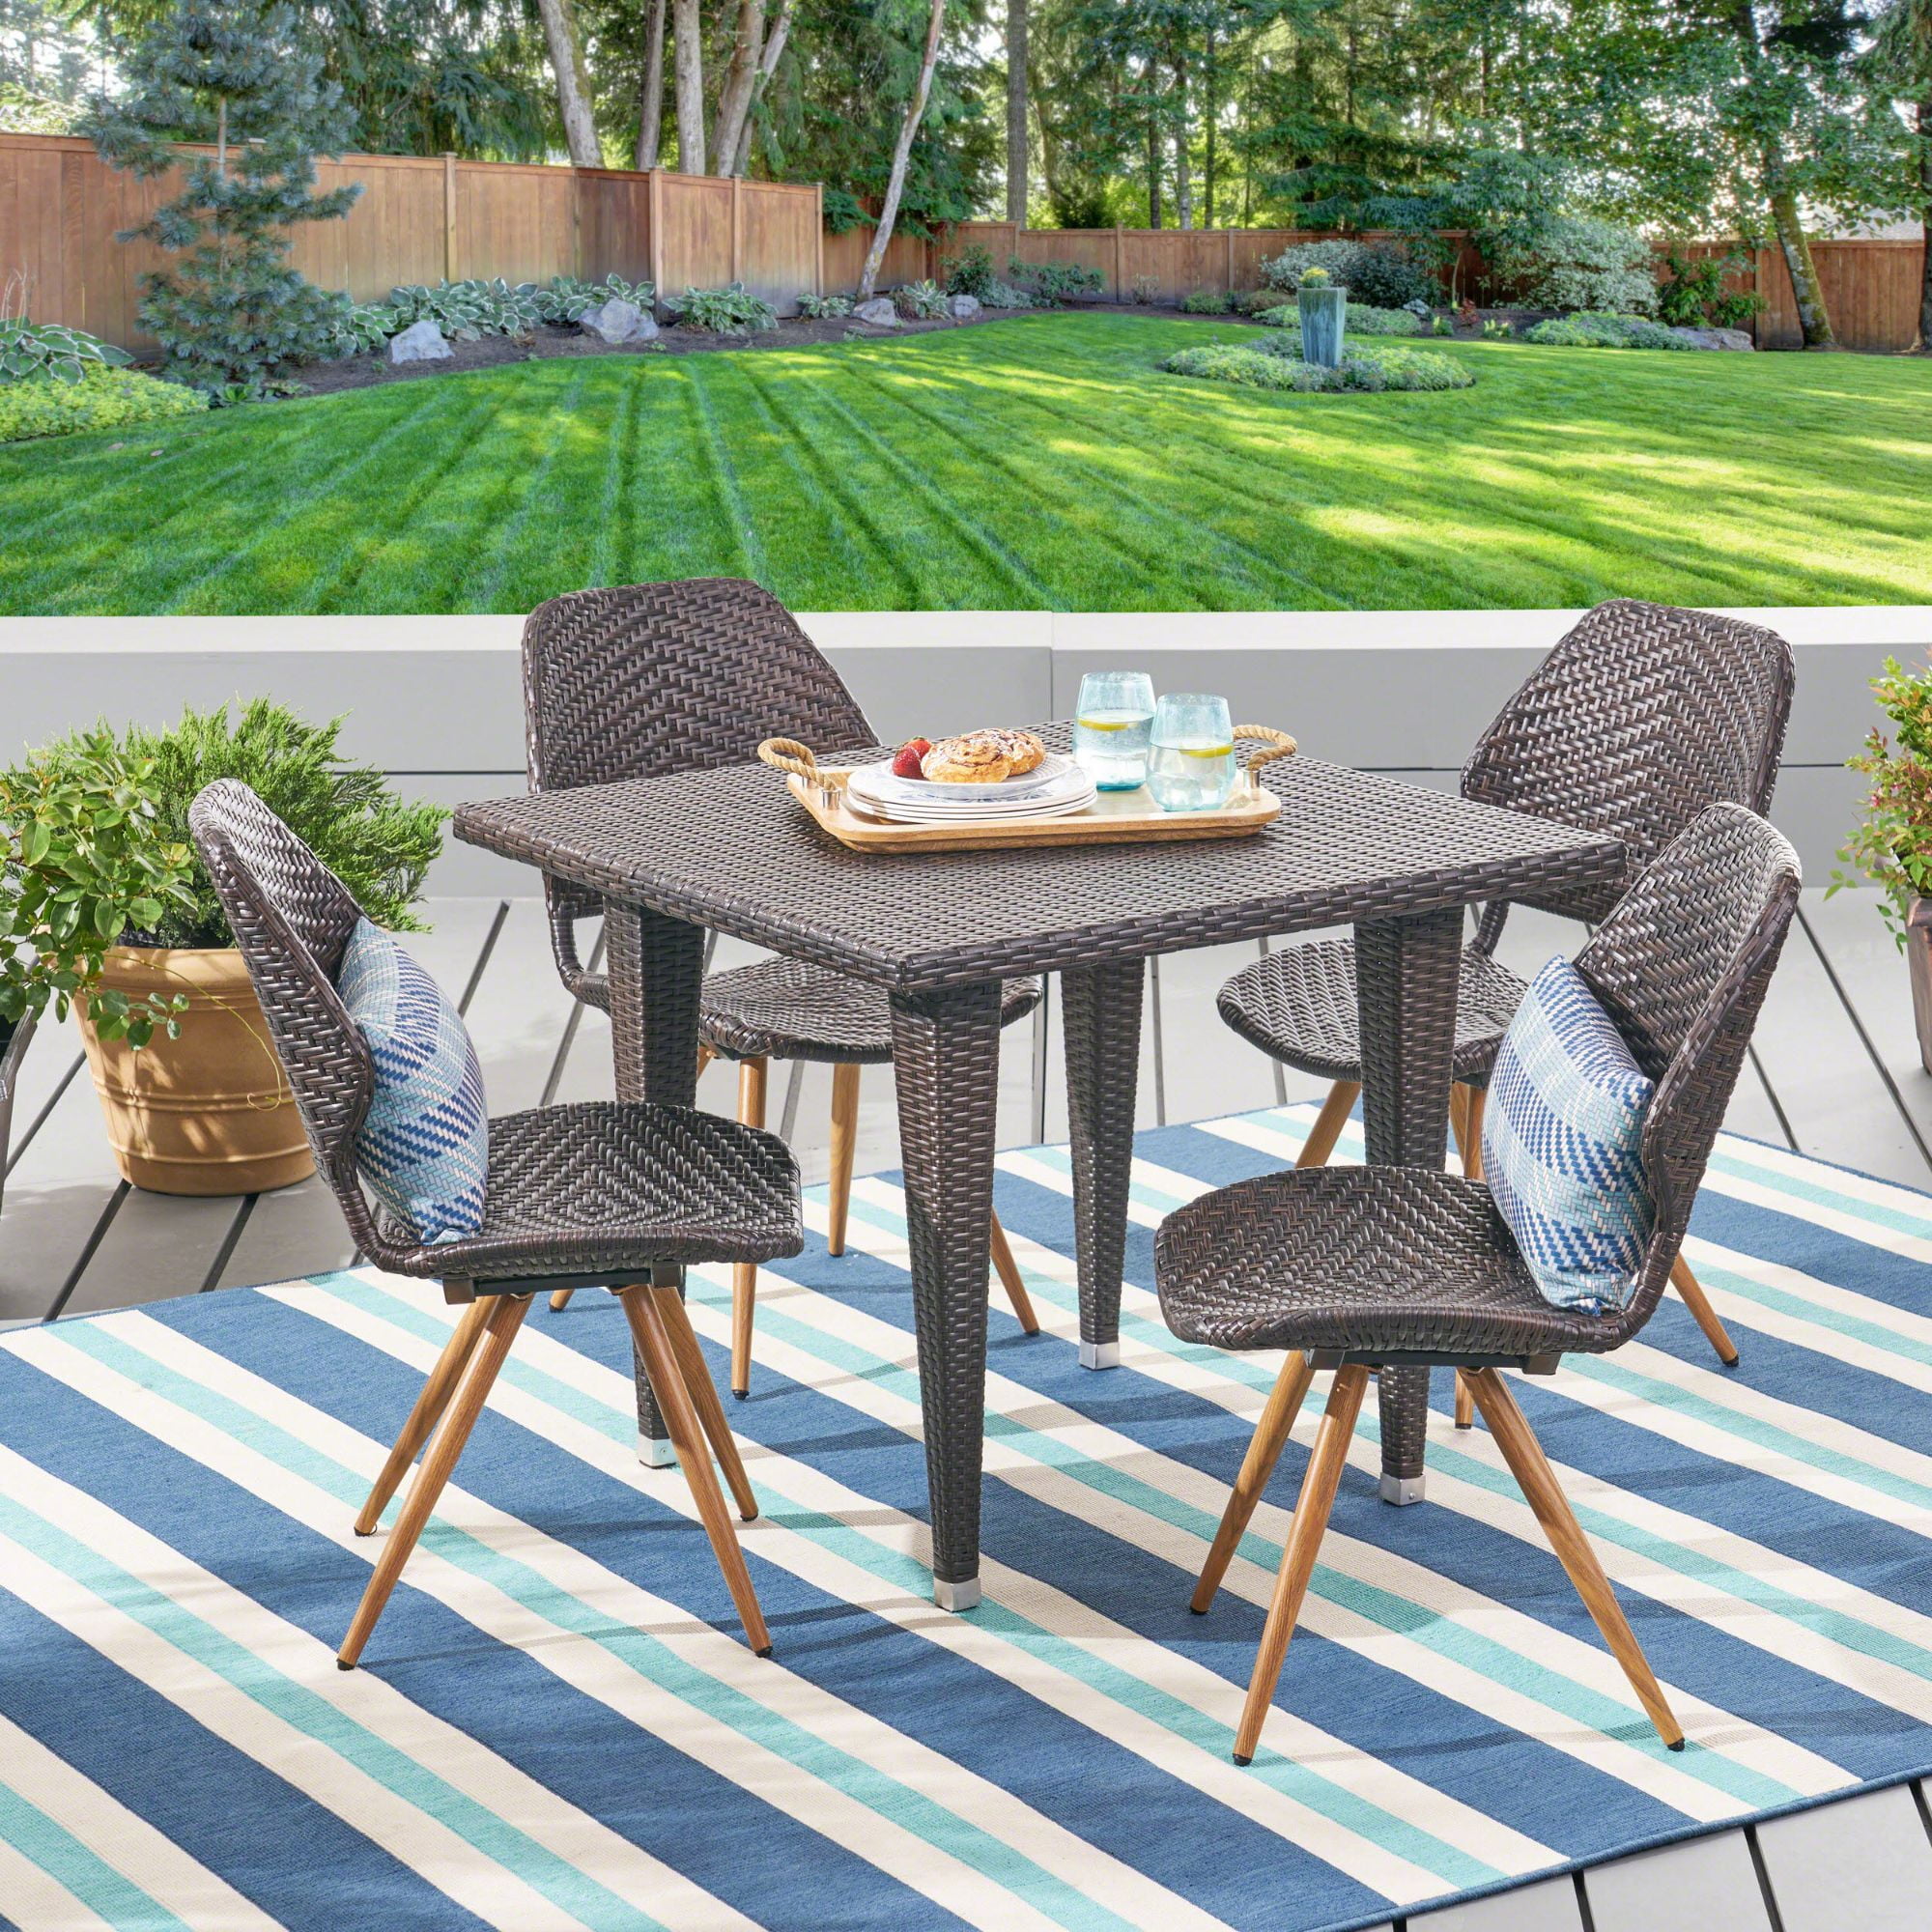 Durable Outdoor Dining Sets For Backyard Parties